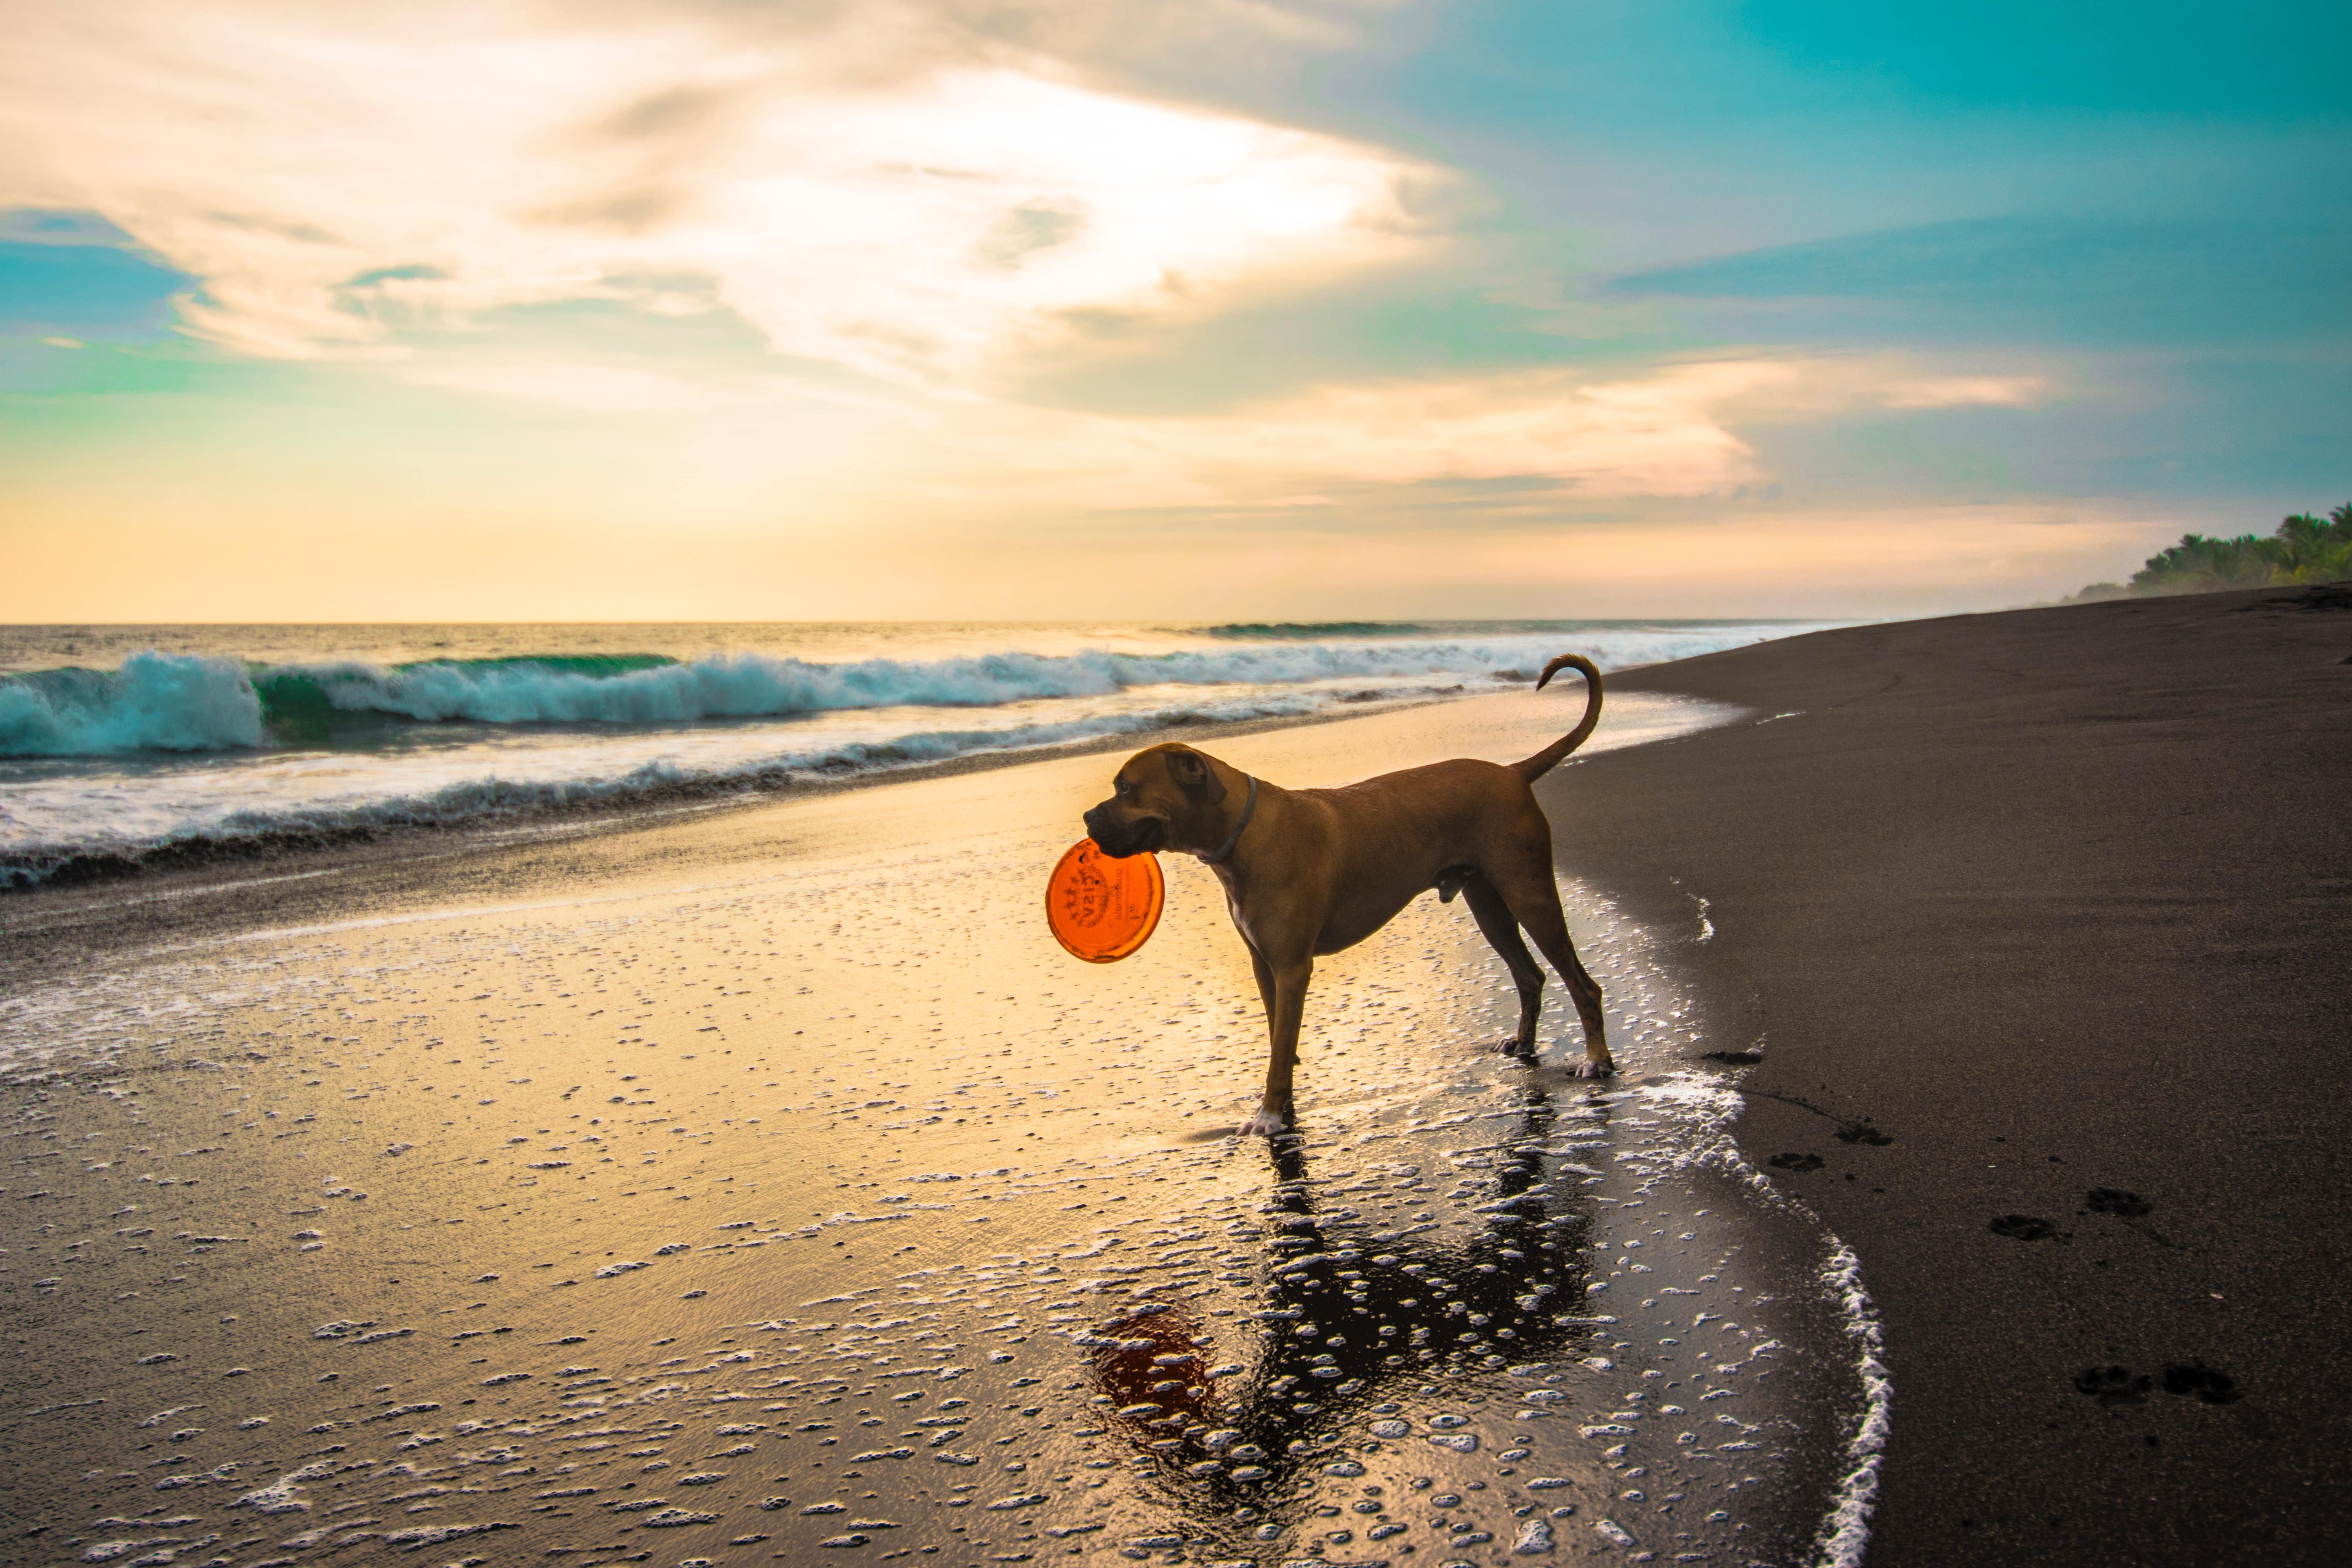 Stock image - Dog with Frisbee standing on a beach - Pets holiday - Photo by Lenin Estrada from Pexels